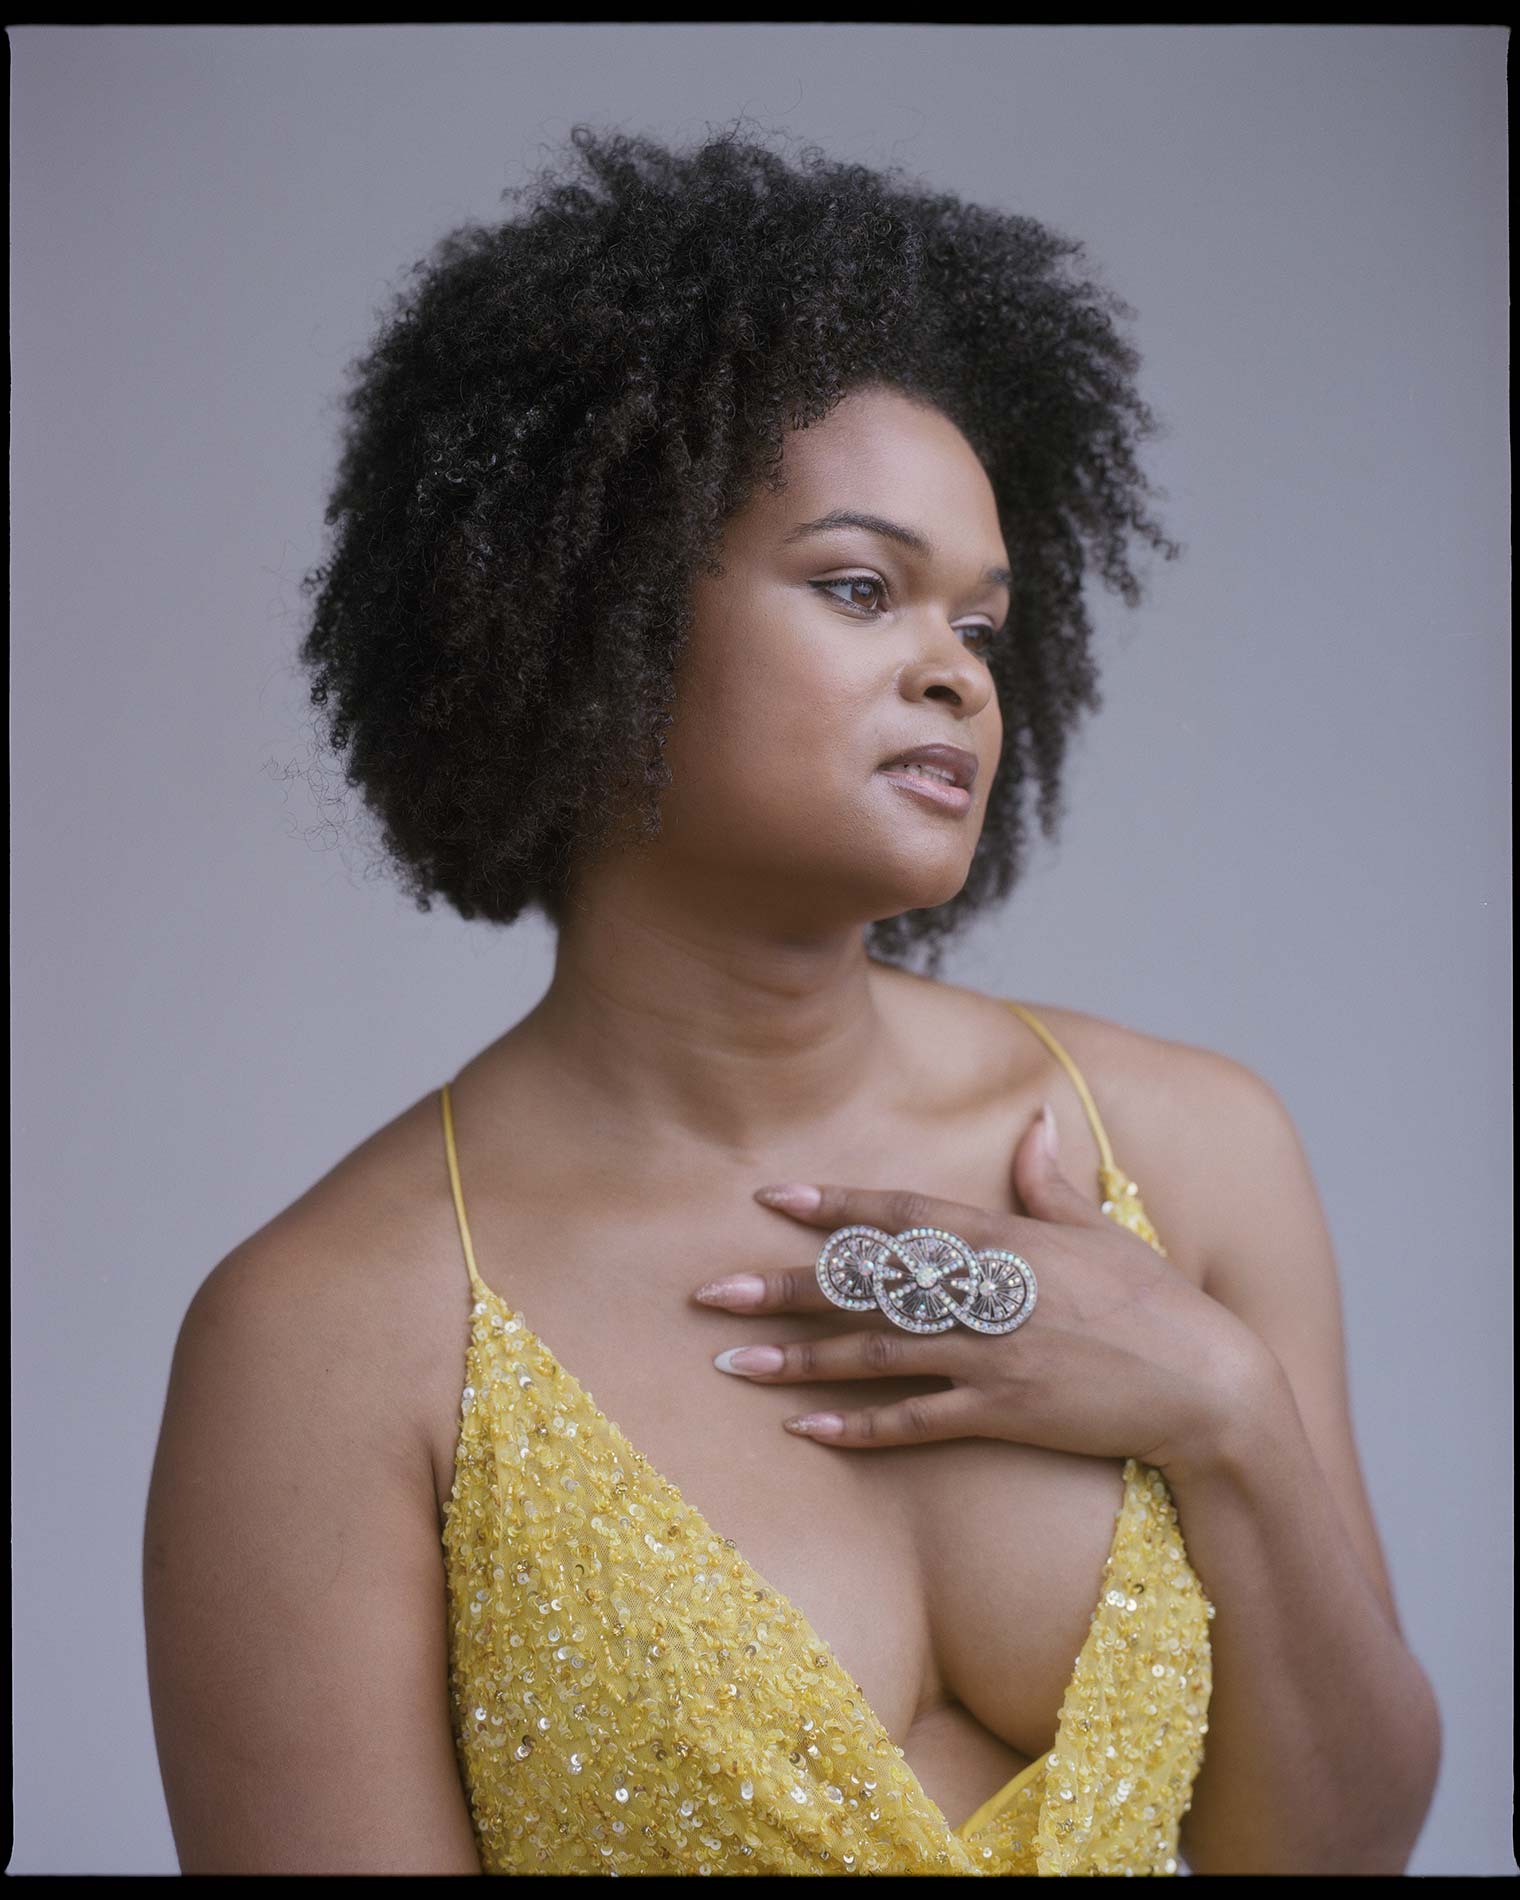 M. Cooper | Raquel Willis — "After Hours: Studio Collection" / Personal Work